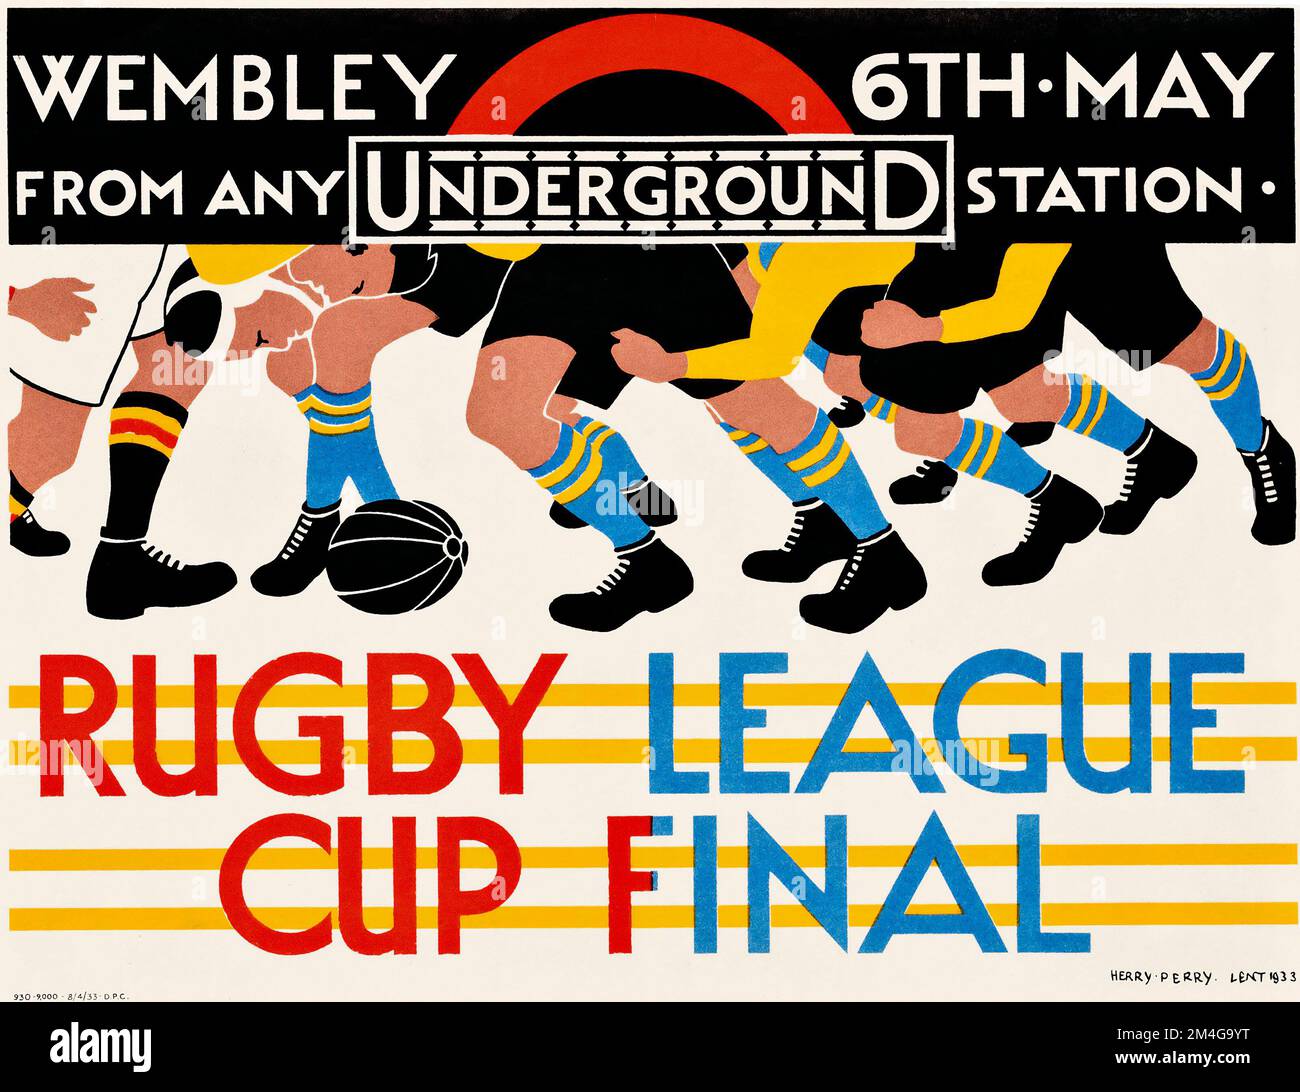 London Underground poster - Herry (Heather) Perry artwork - RUGBY LEAGUE, CUP FINAL 1933 Stock Photo